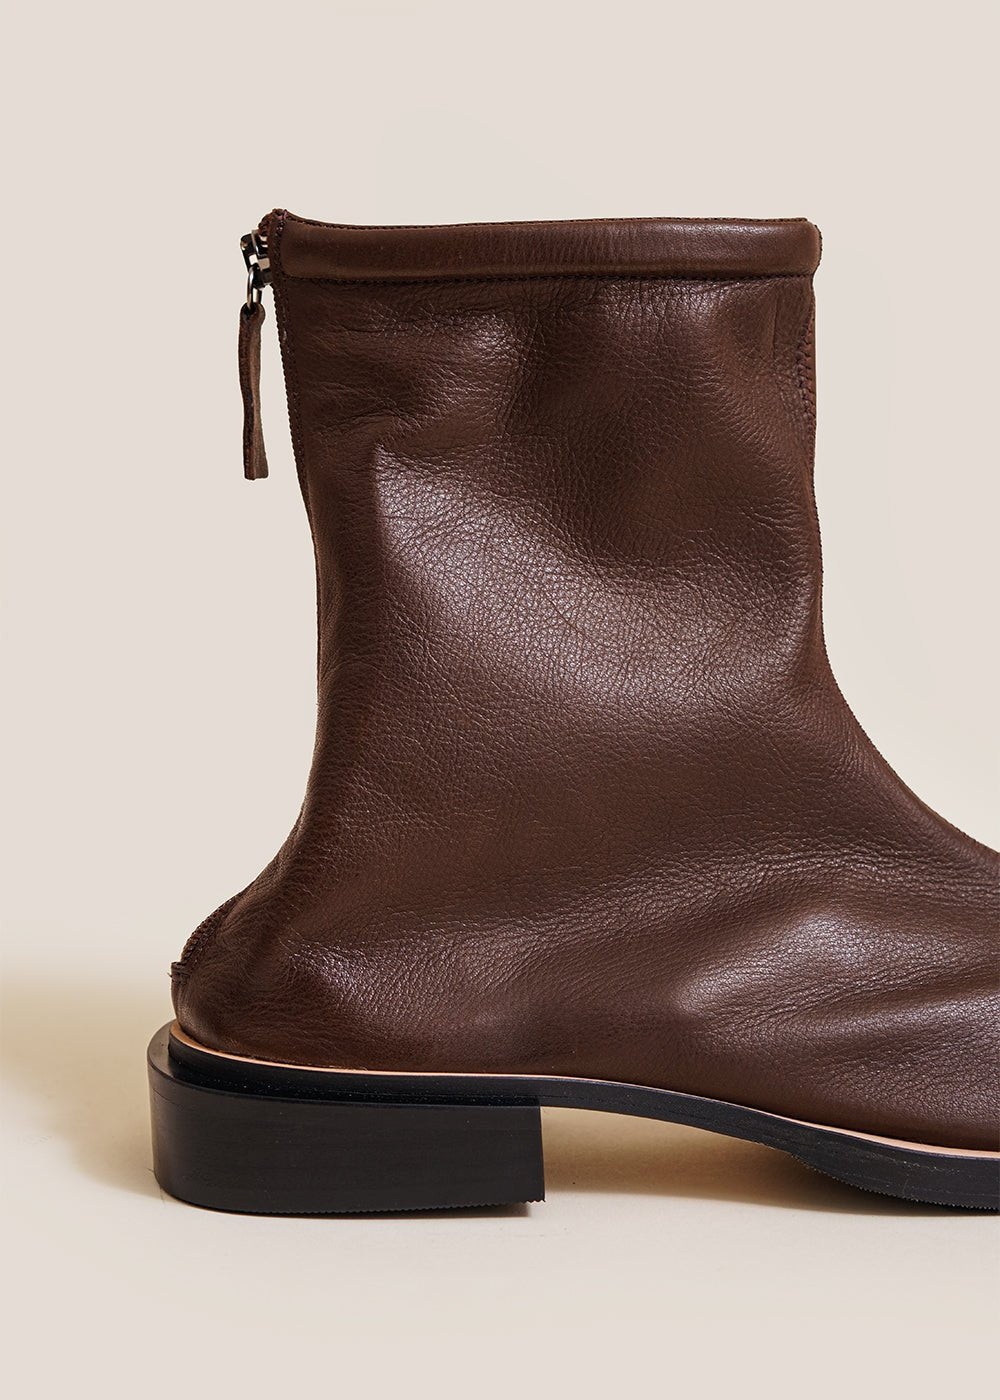 About Arianne Caoba Dean Boots - New Classics Studios Sustainable Ethical Fashion Canada